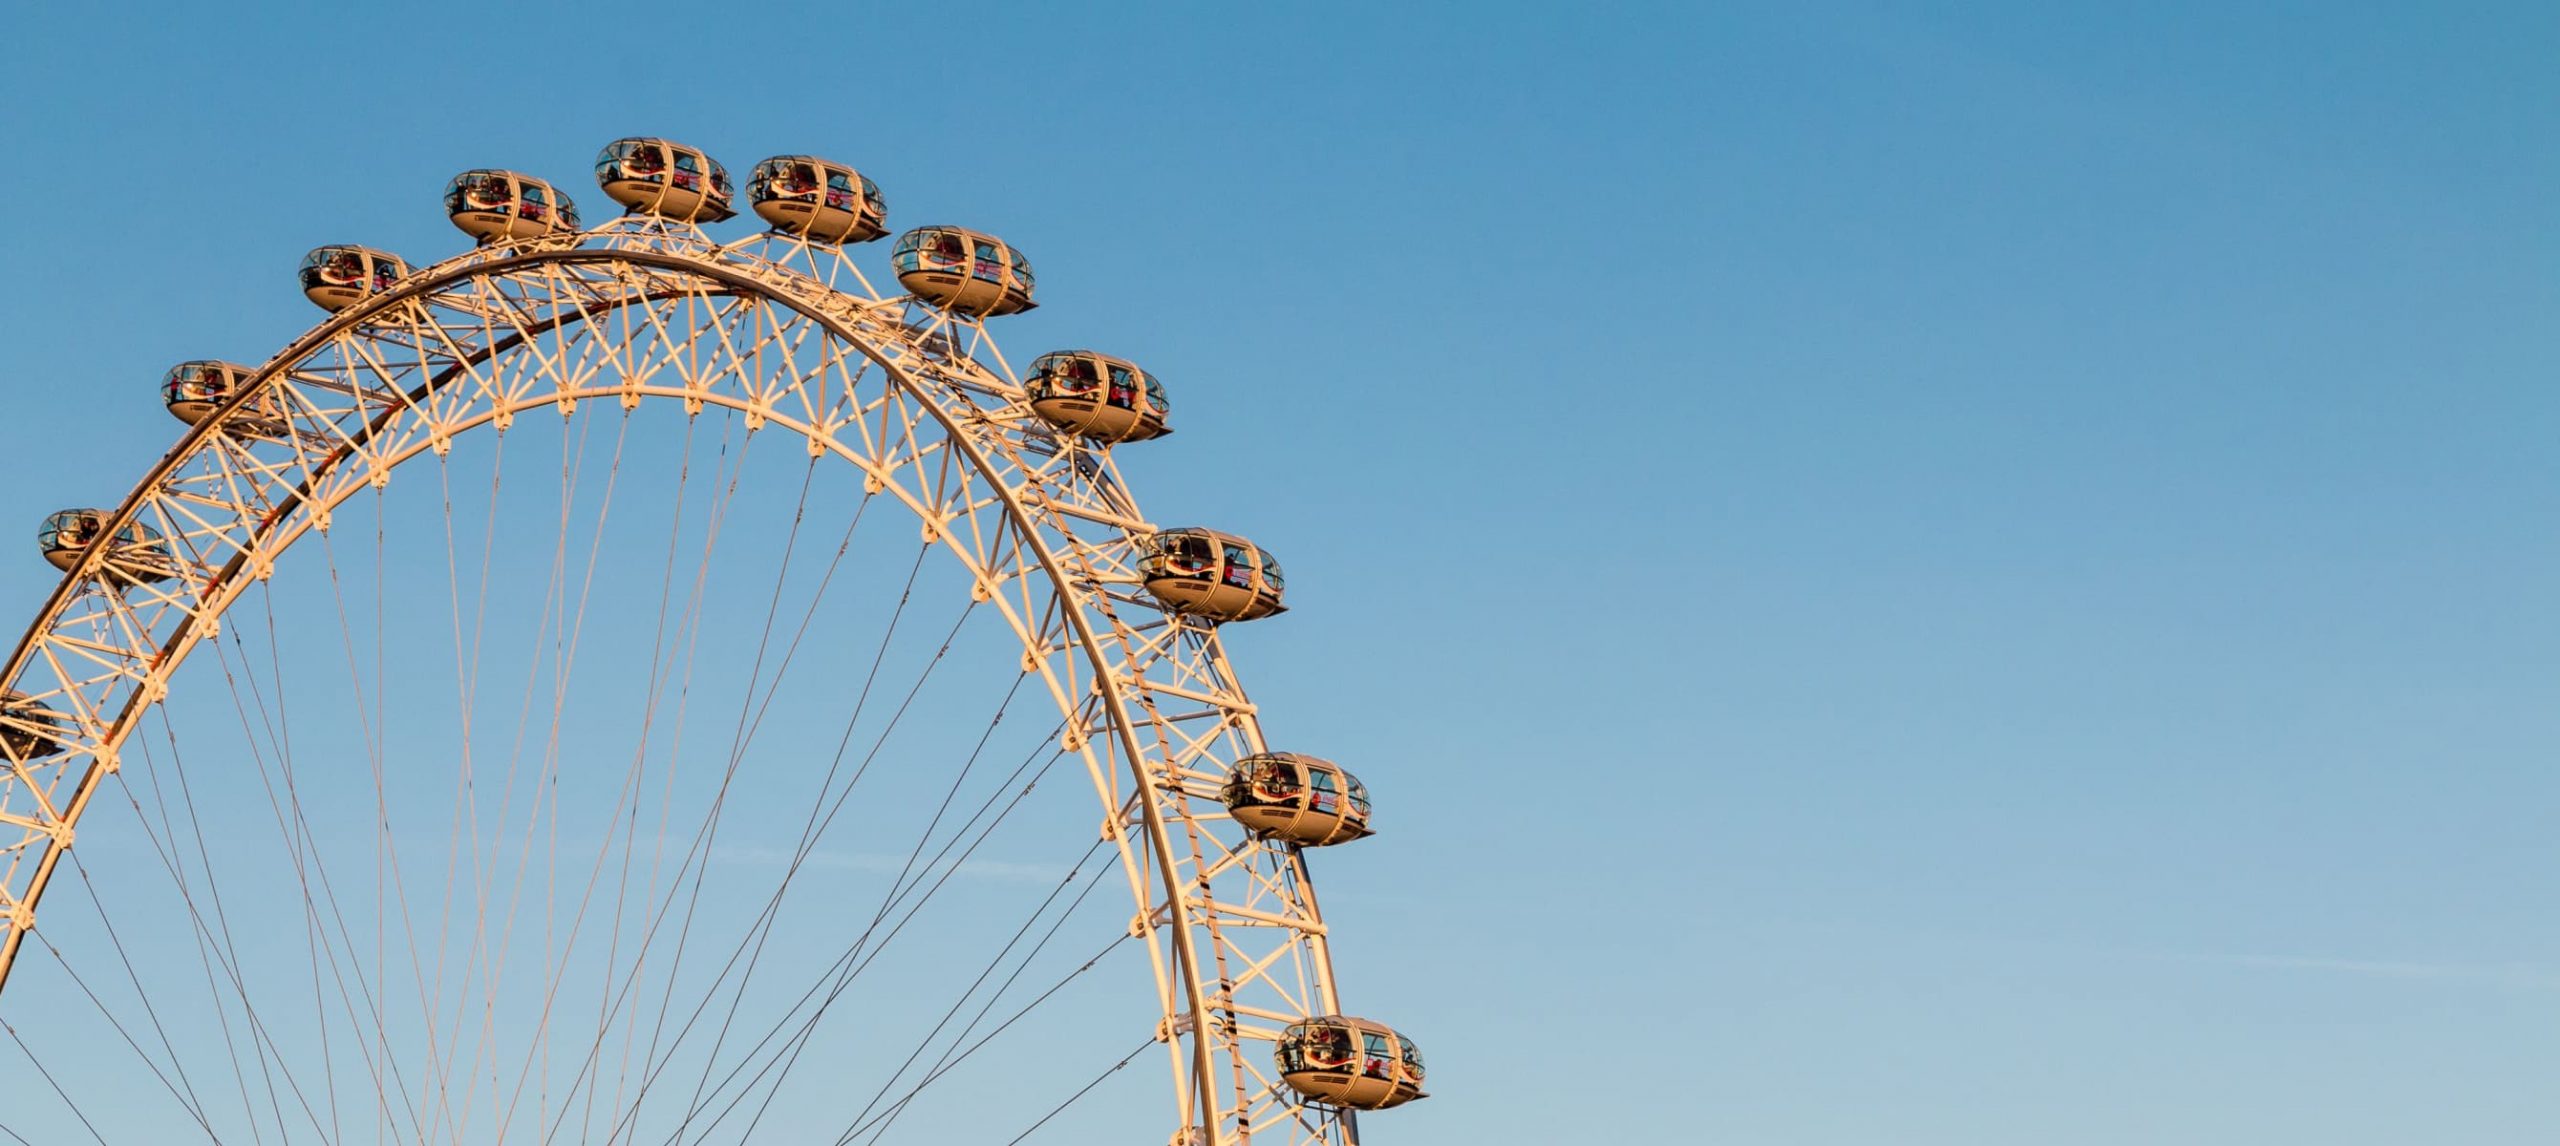 11 Fun Facts About The London Eye